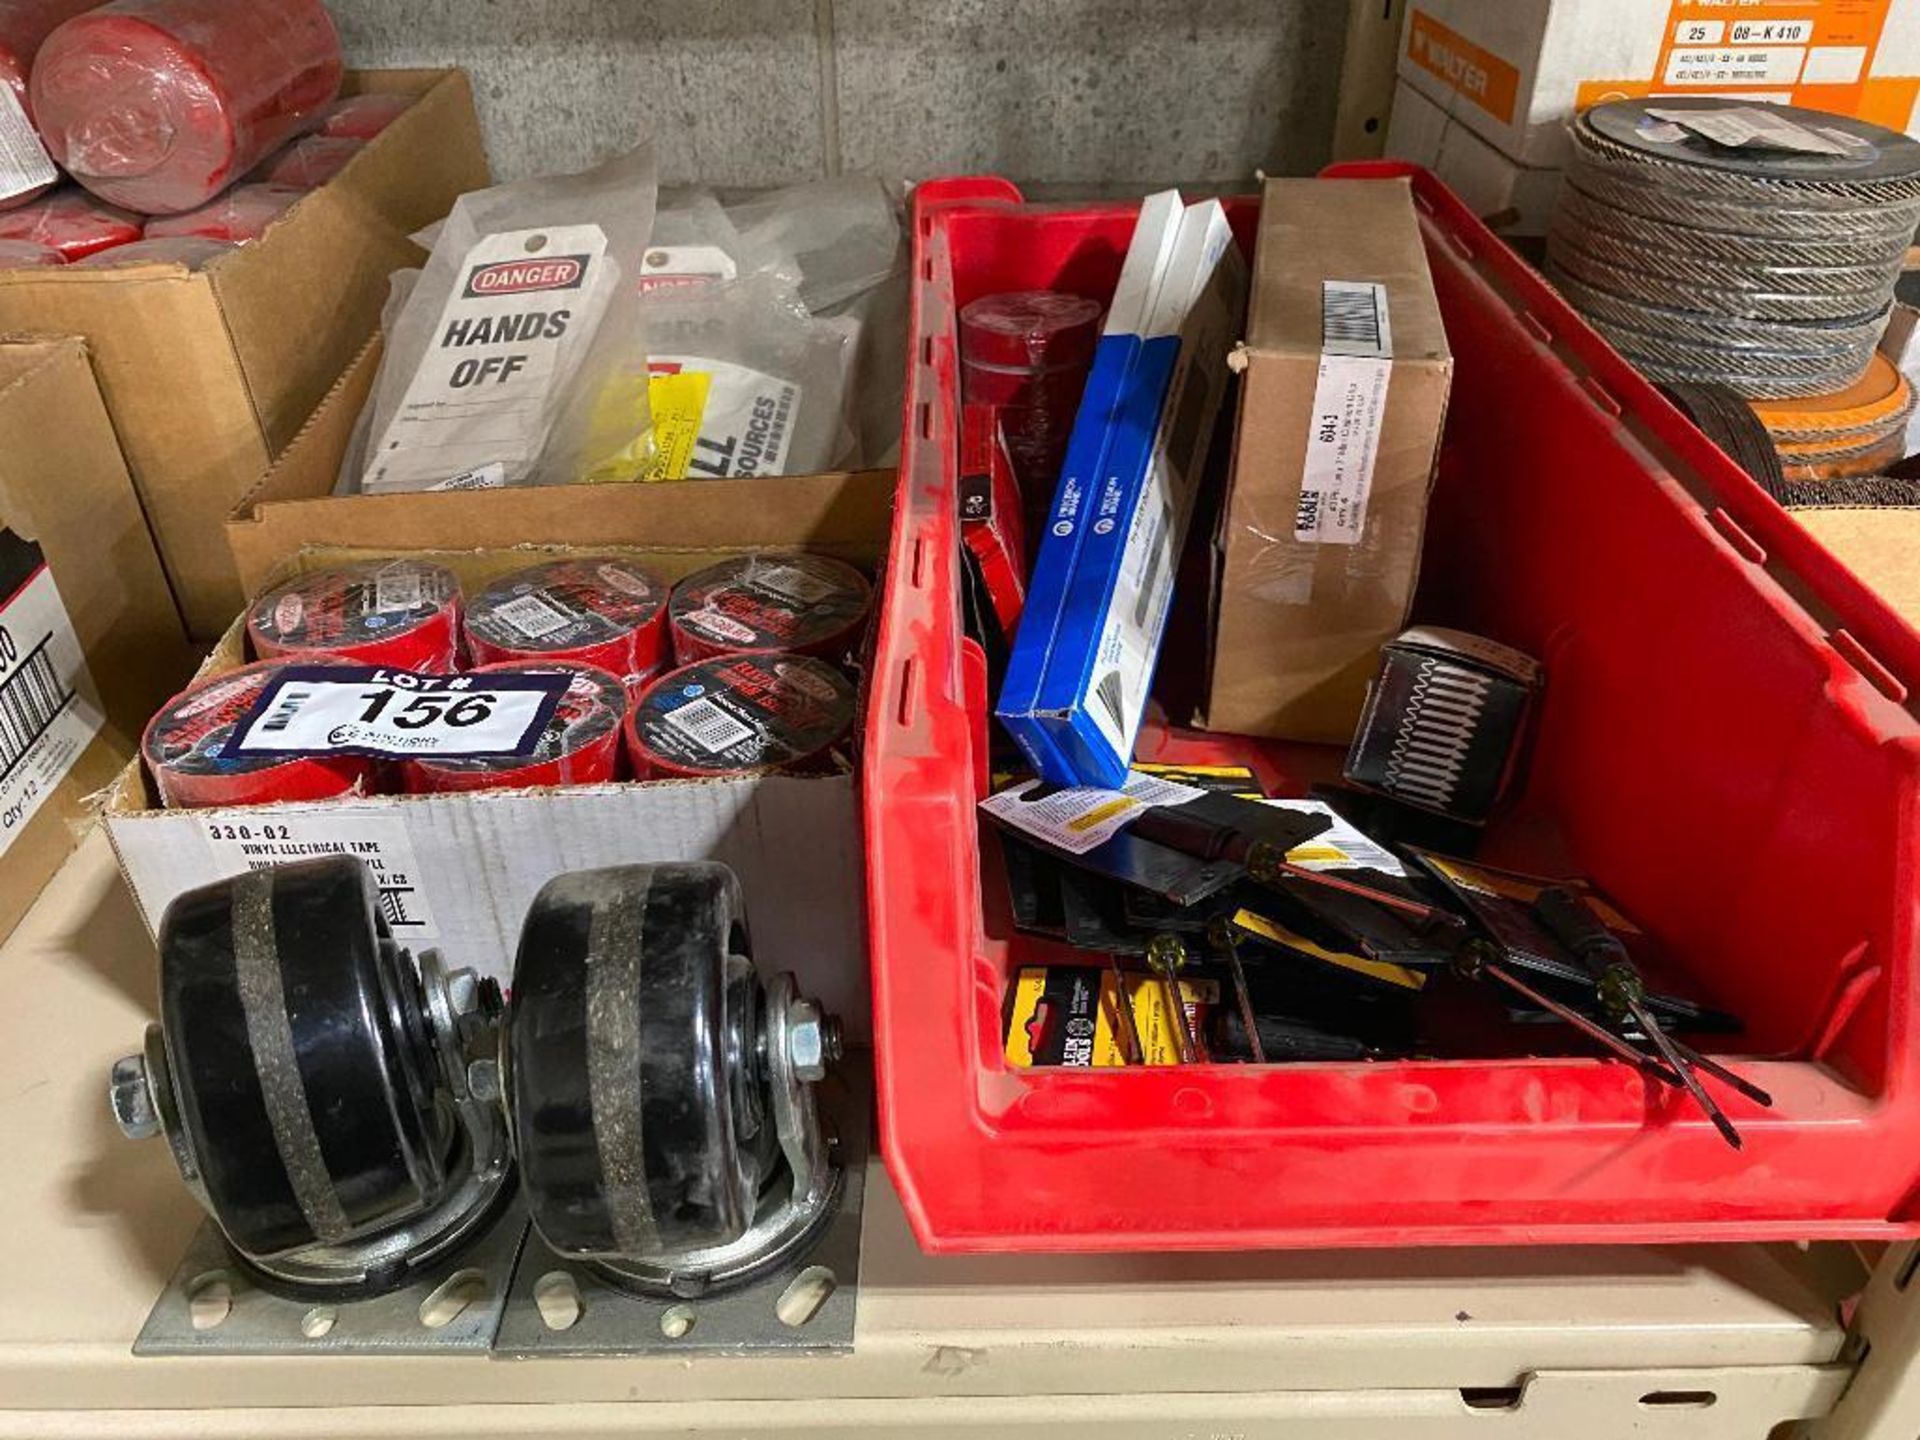 Lot of Asst. Electrical Tape, Screwdrivers, Tags, etc.